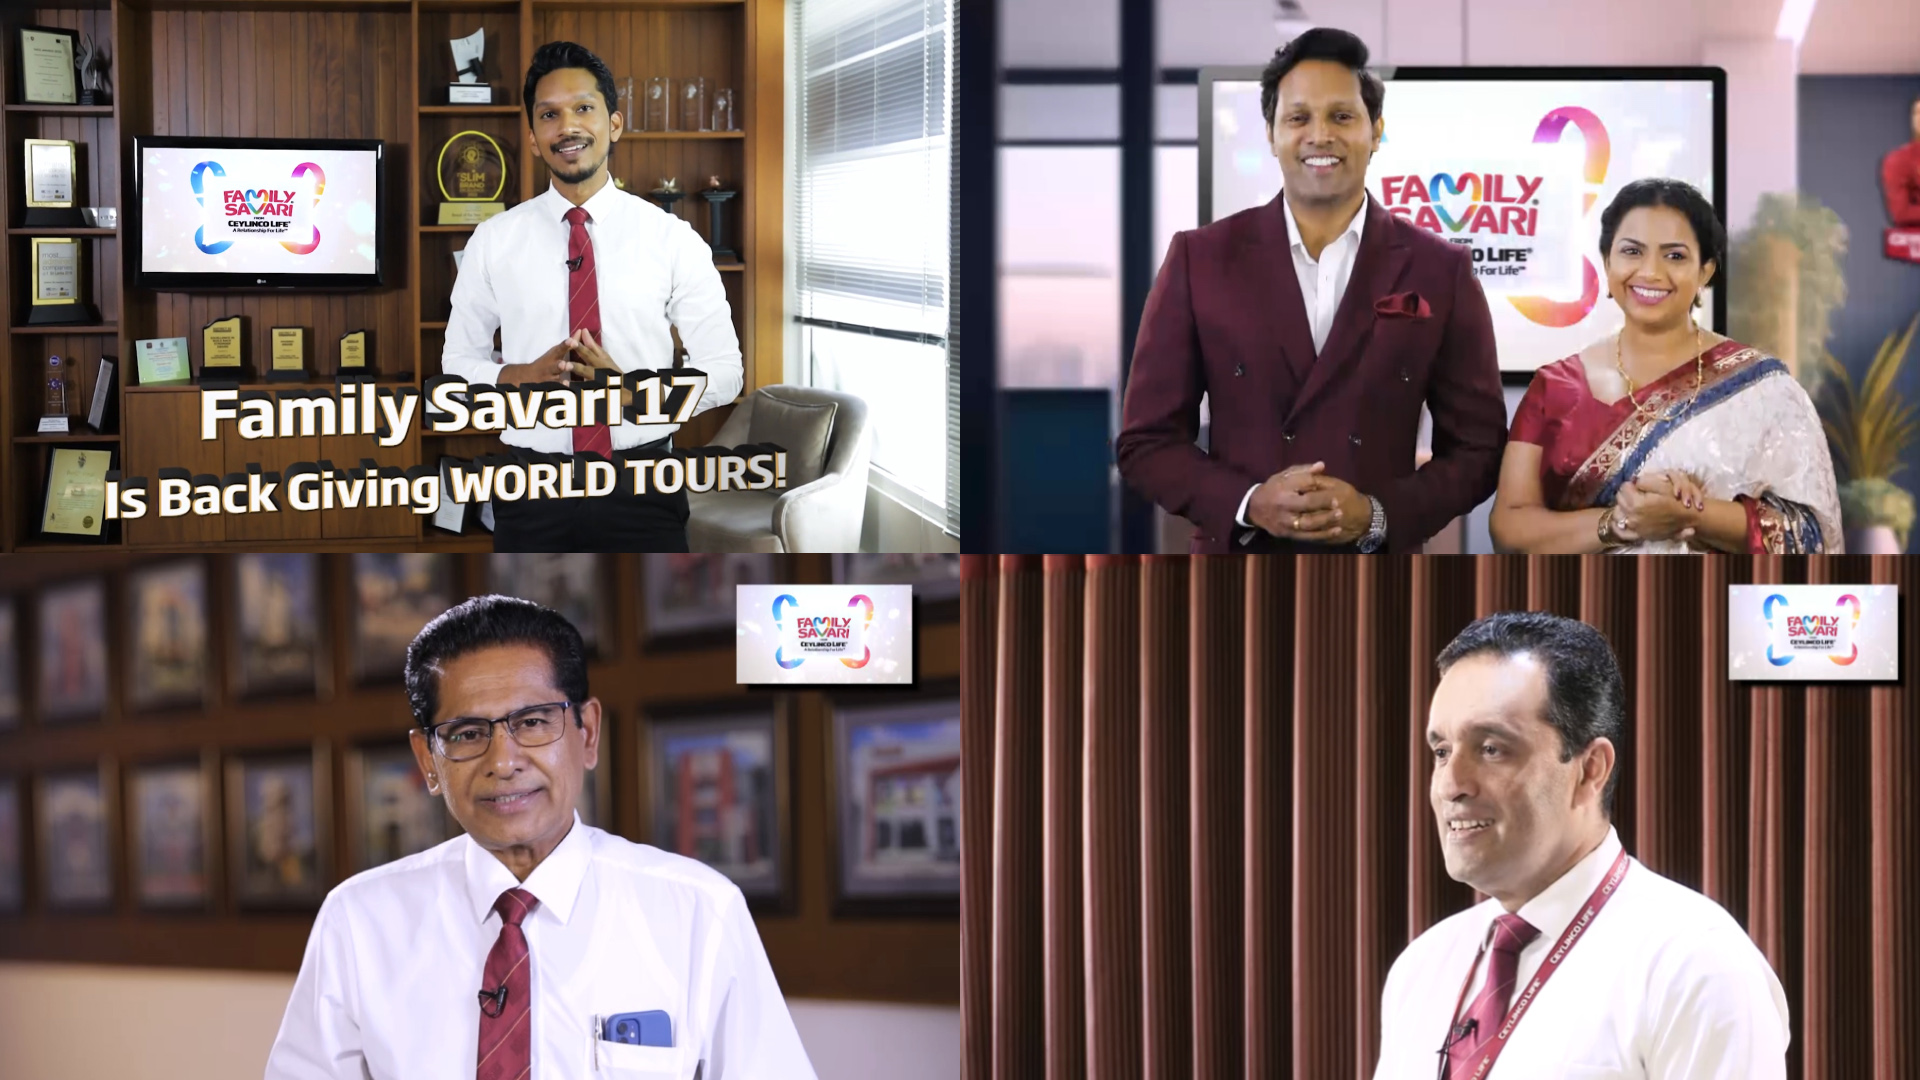 Screen visuals from the virtual launch of Ceylinco Life’s ‘Family Savari 17’ promotion.